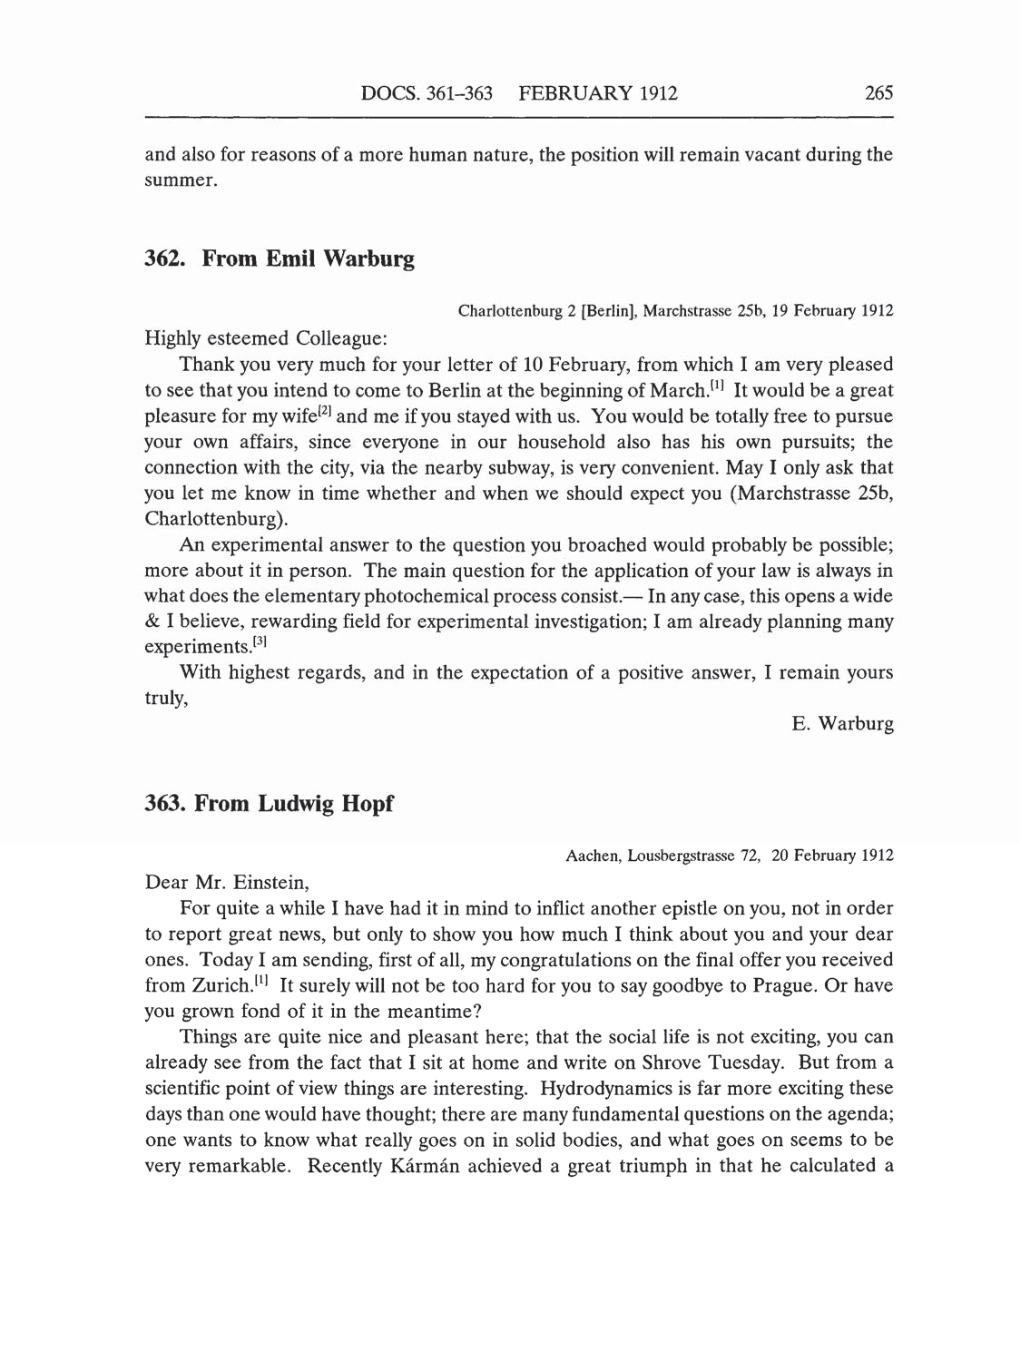 Volume 5: The Swiss Years: Correspondence, 1902-1914 (English translation supplement) page 265